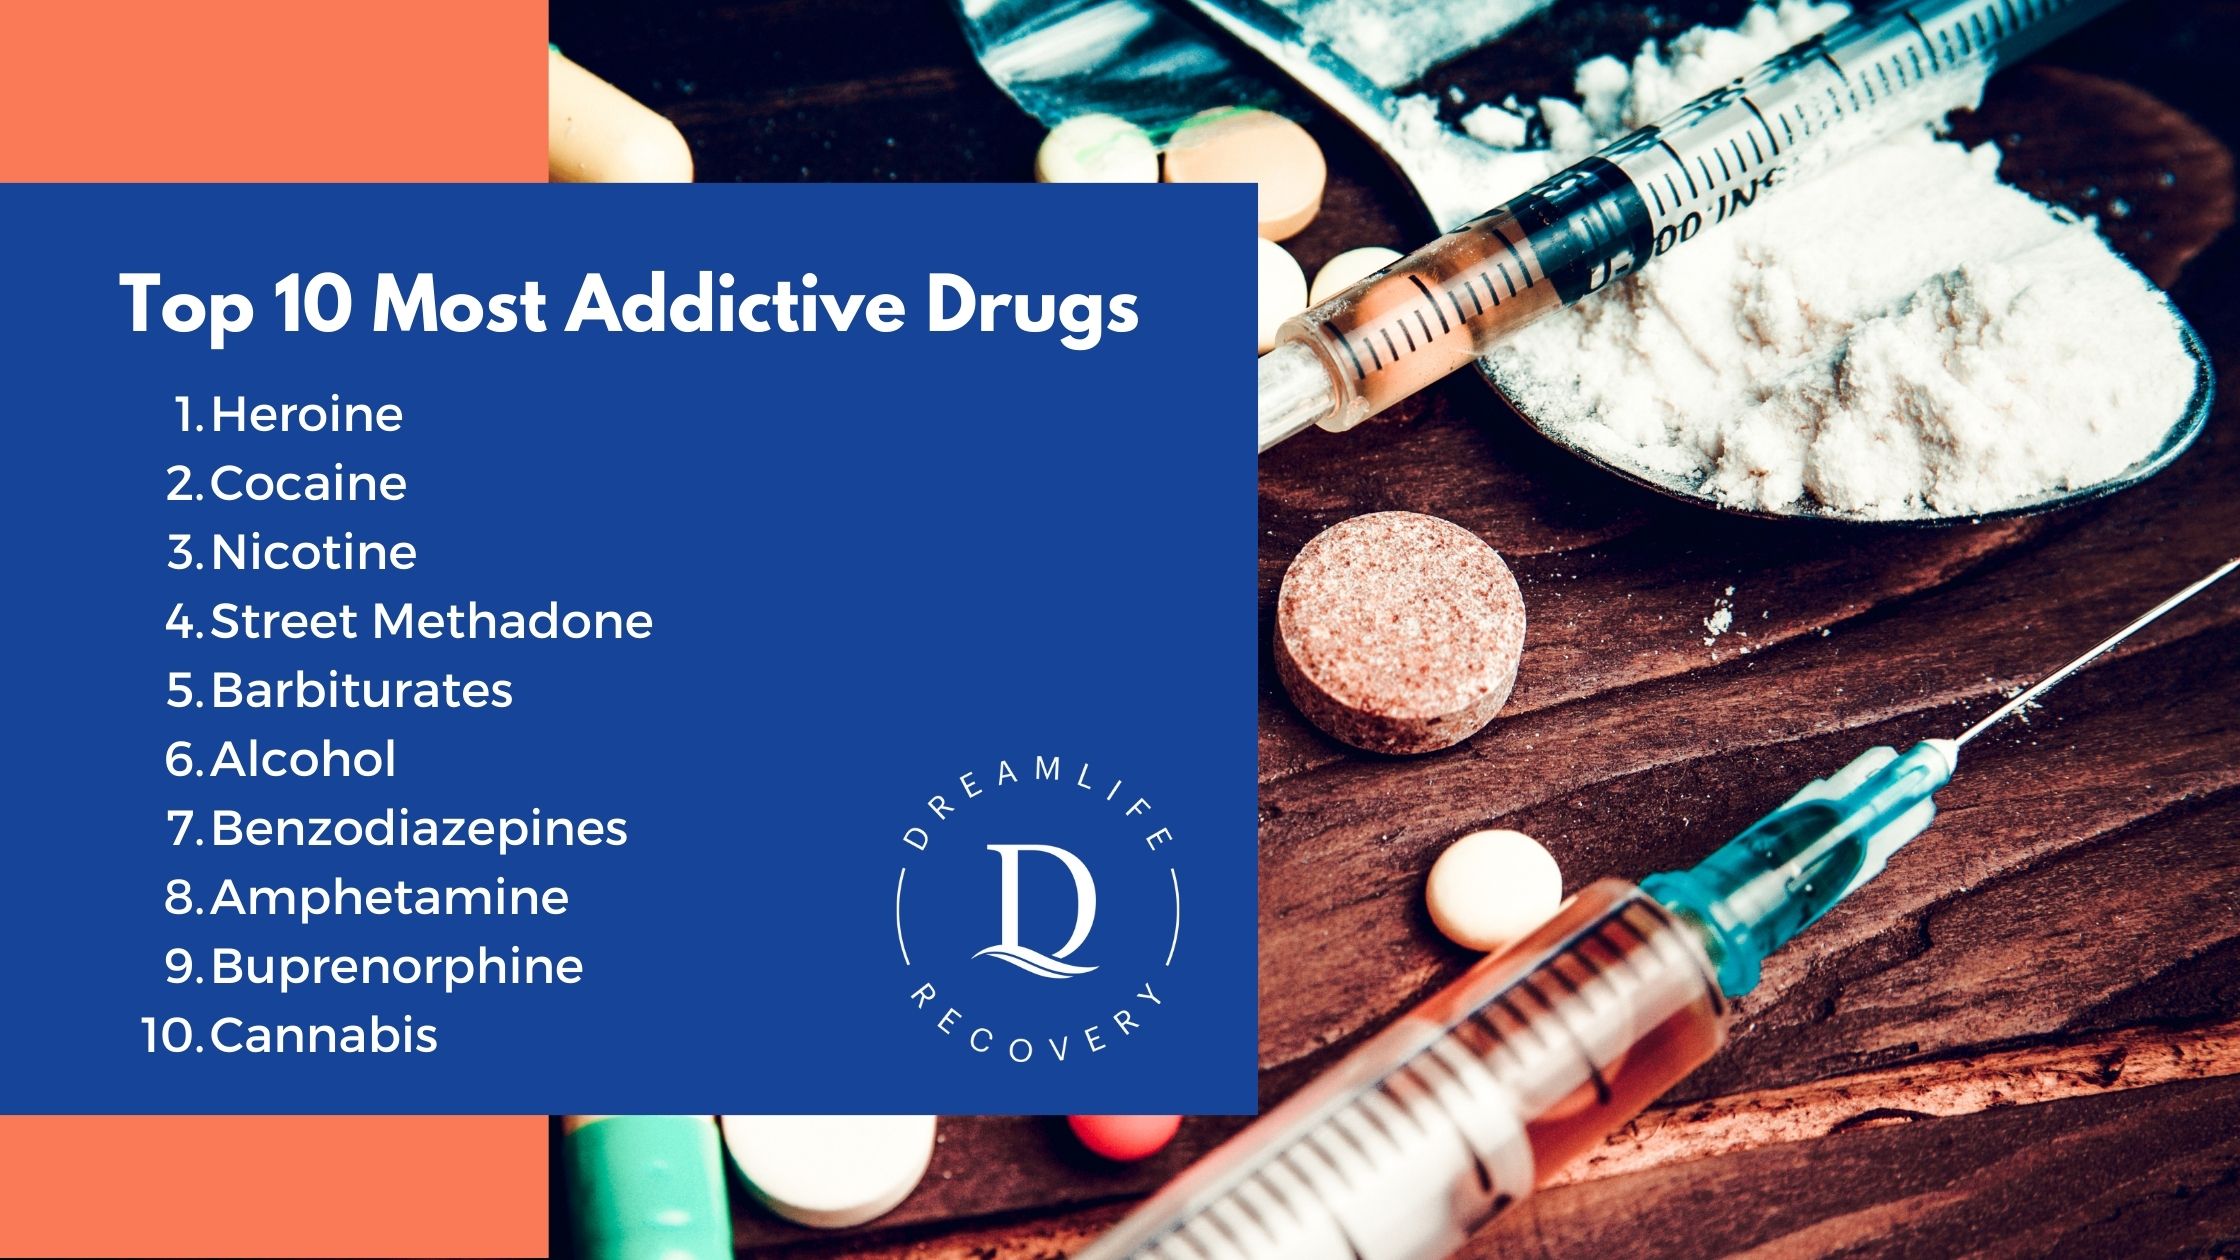 Lis of the Top 10 Most Addictive Drugs